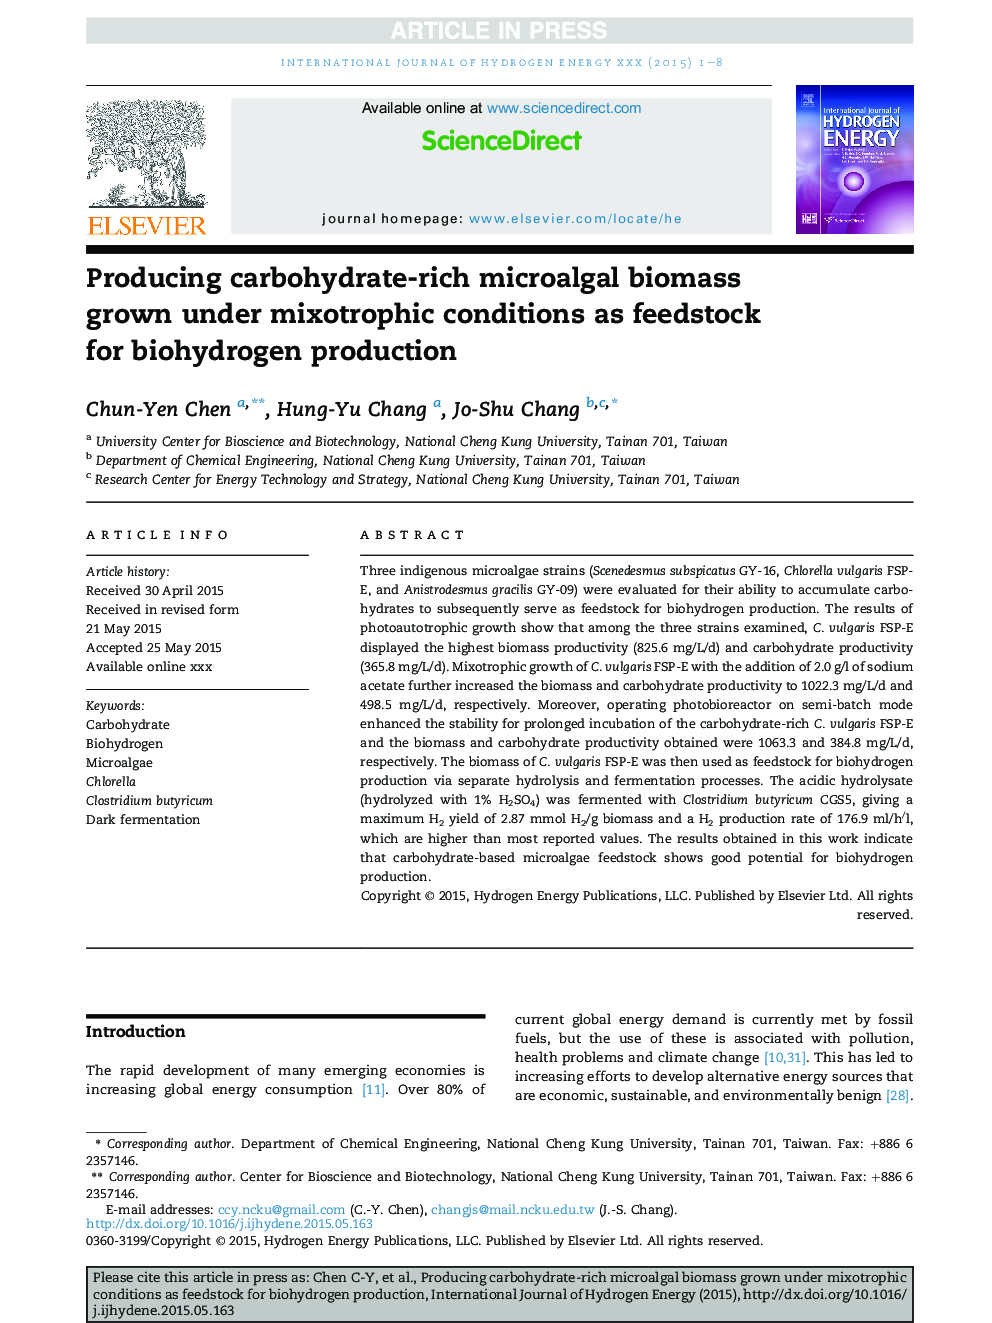 Producing carbohydrate-rich microalgal biomass grown under mixotrophic conditions as feedstock for biohydrogen production